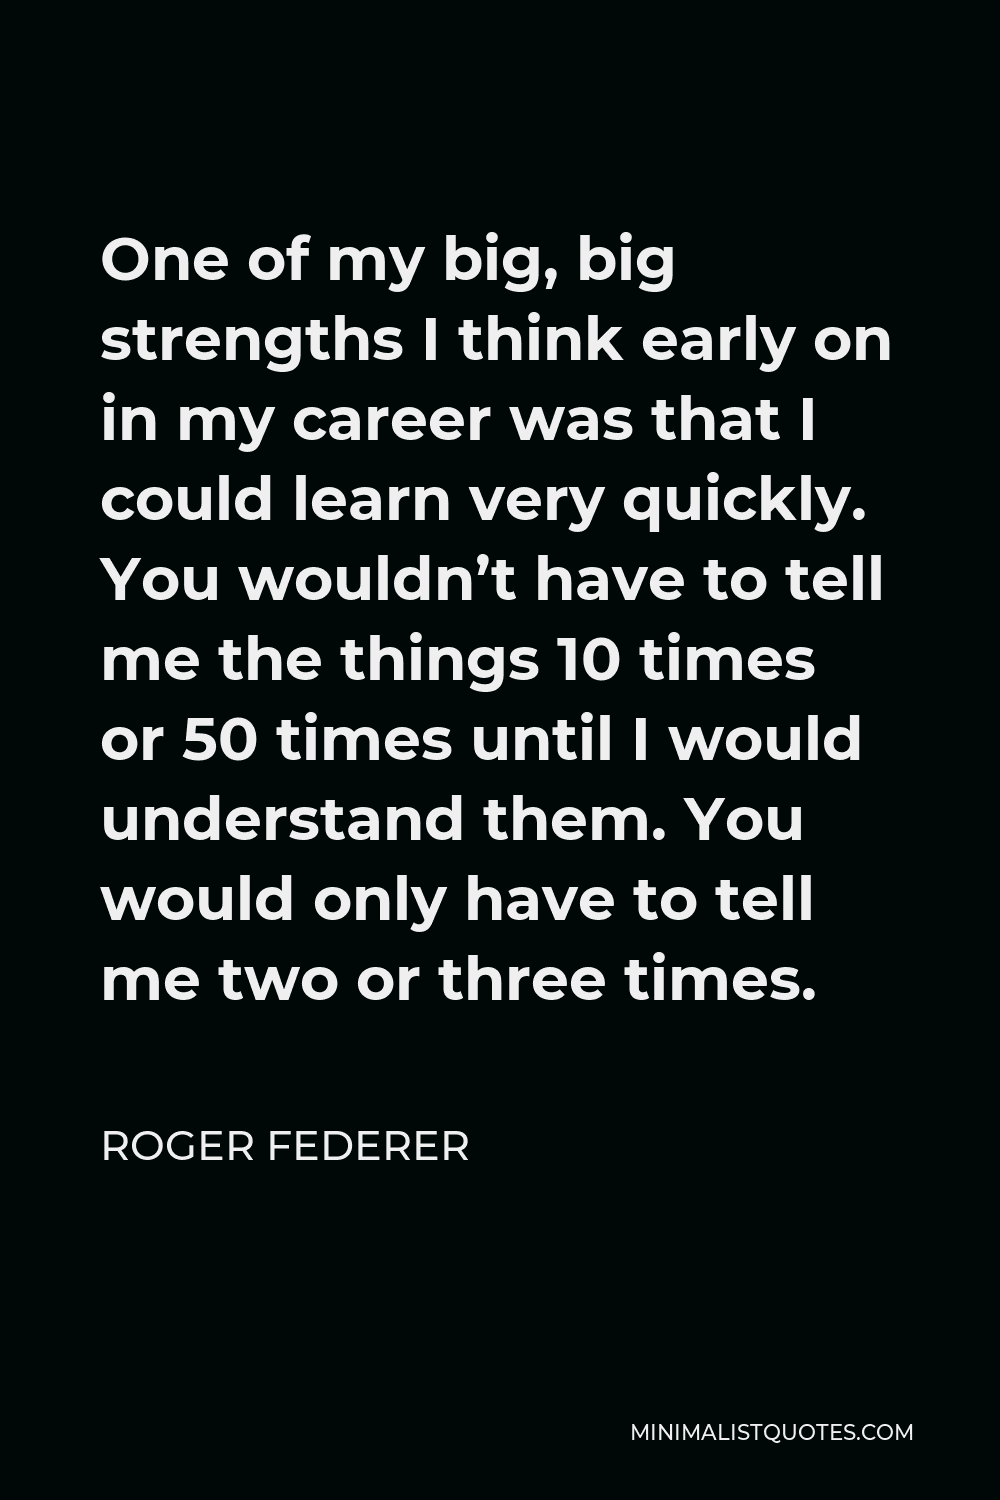 Roger Federer Quote: One of my big, big strengths I think early in my career was that could learn very quickly. You wouldn't have tell me the things 10